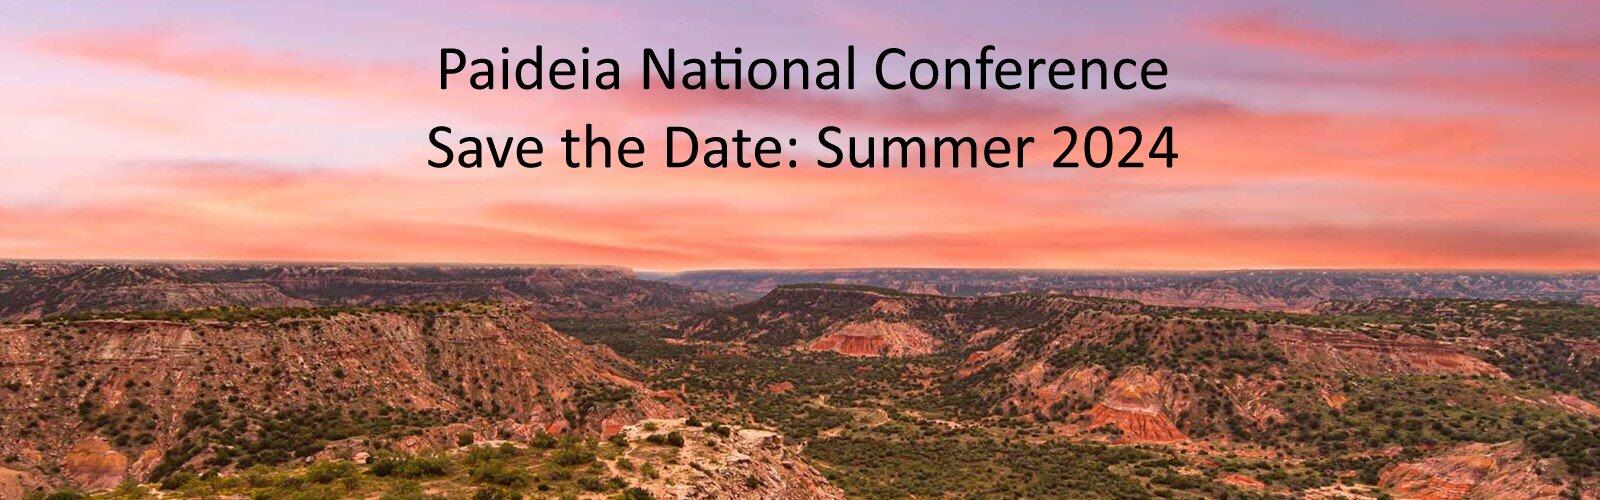 National Conference - Summer 2024